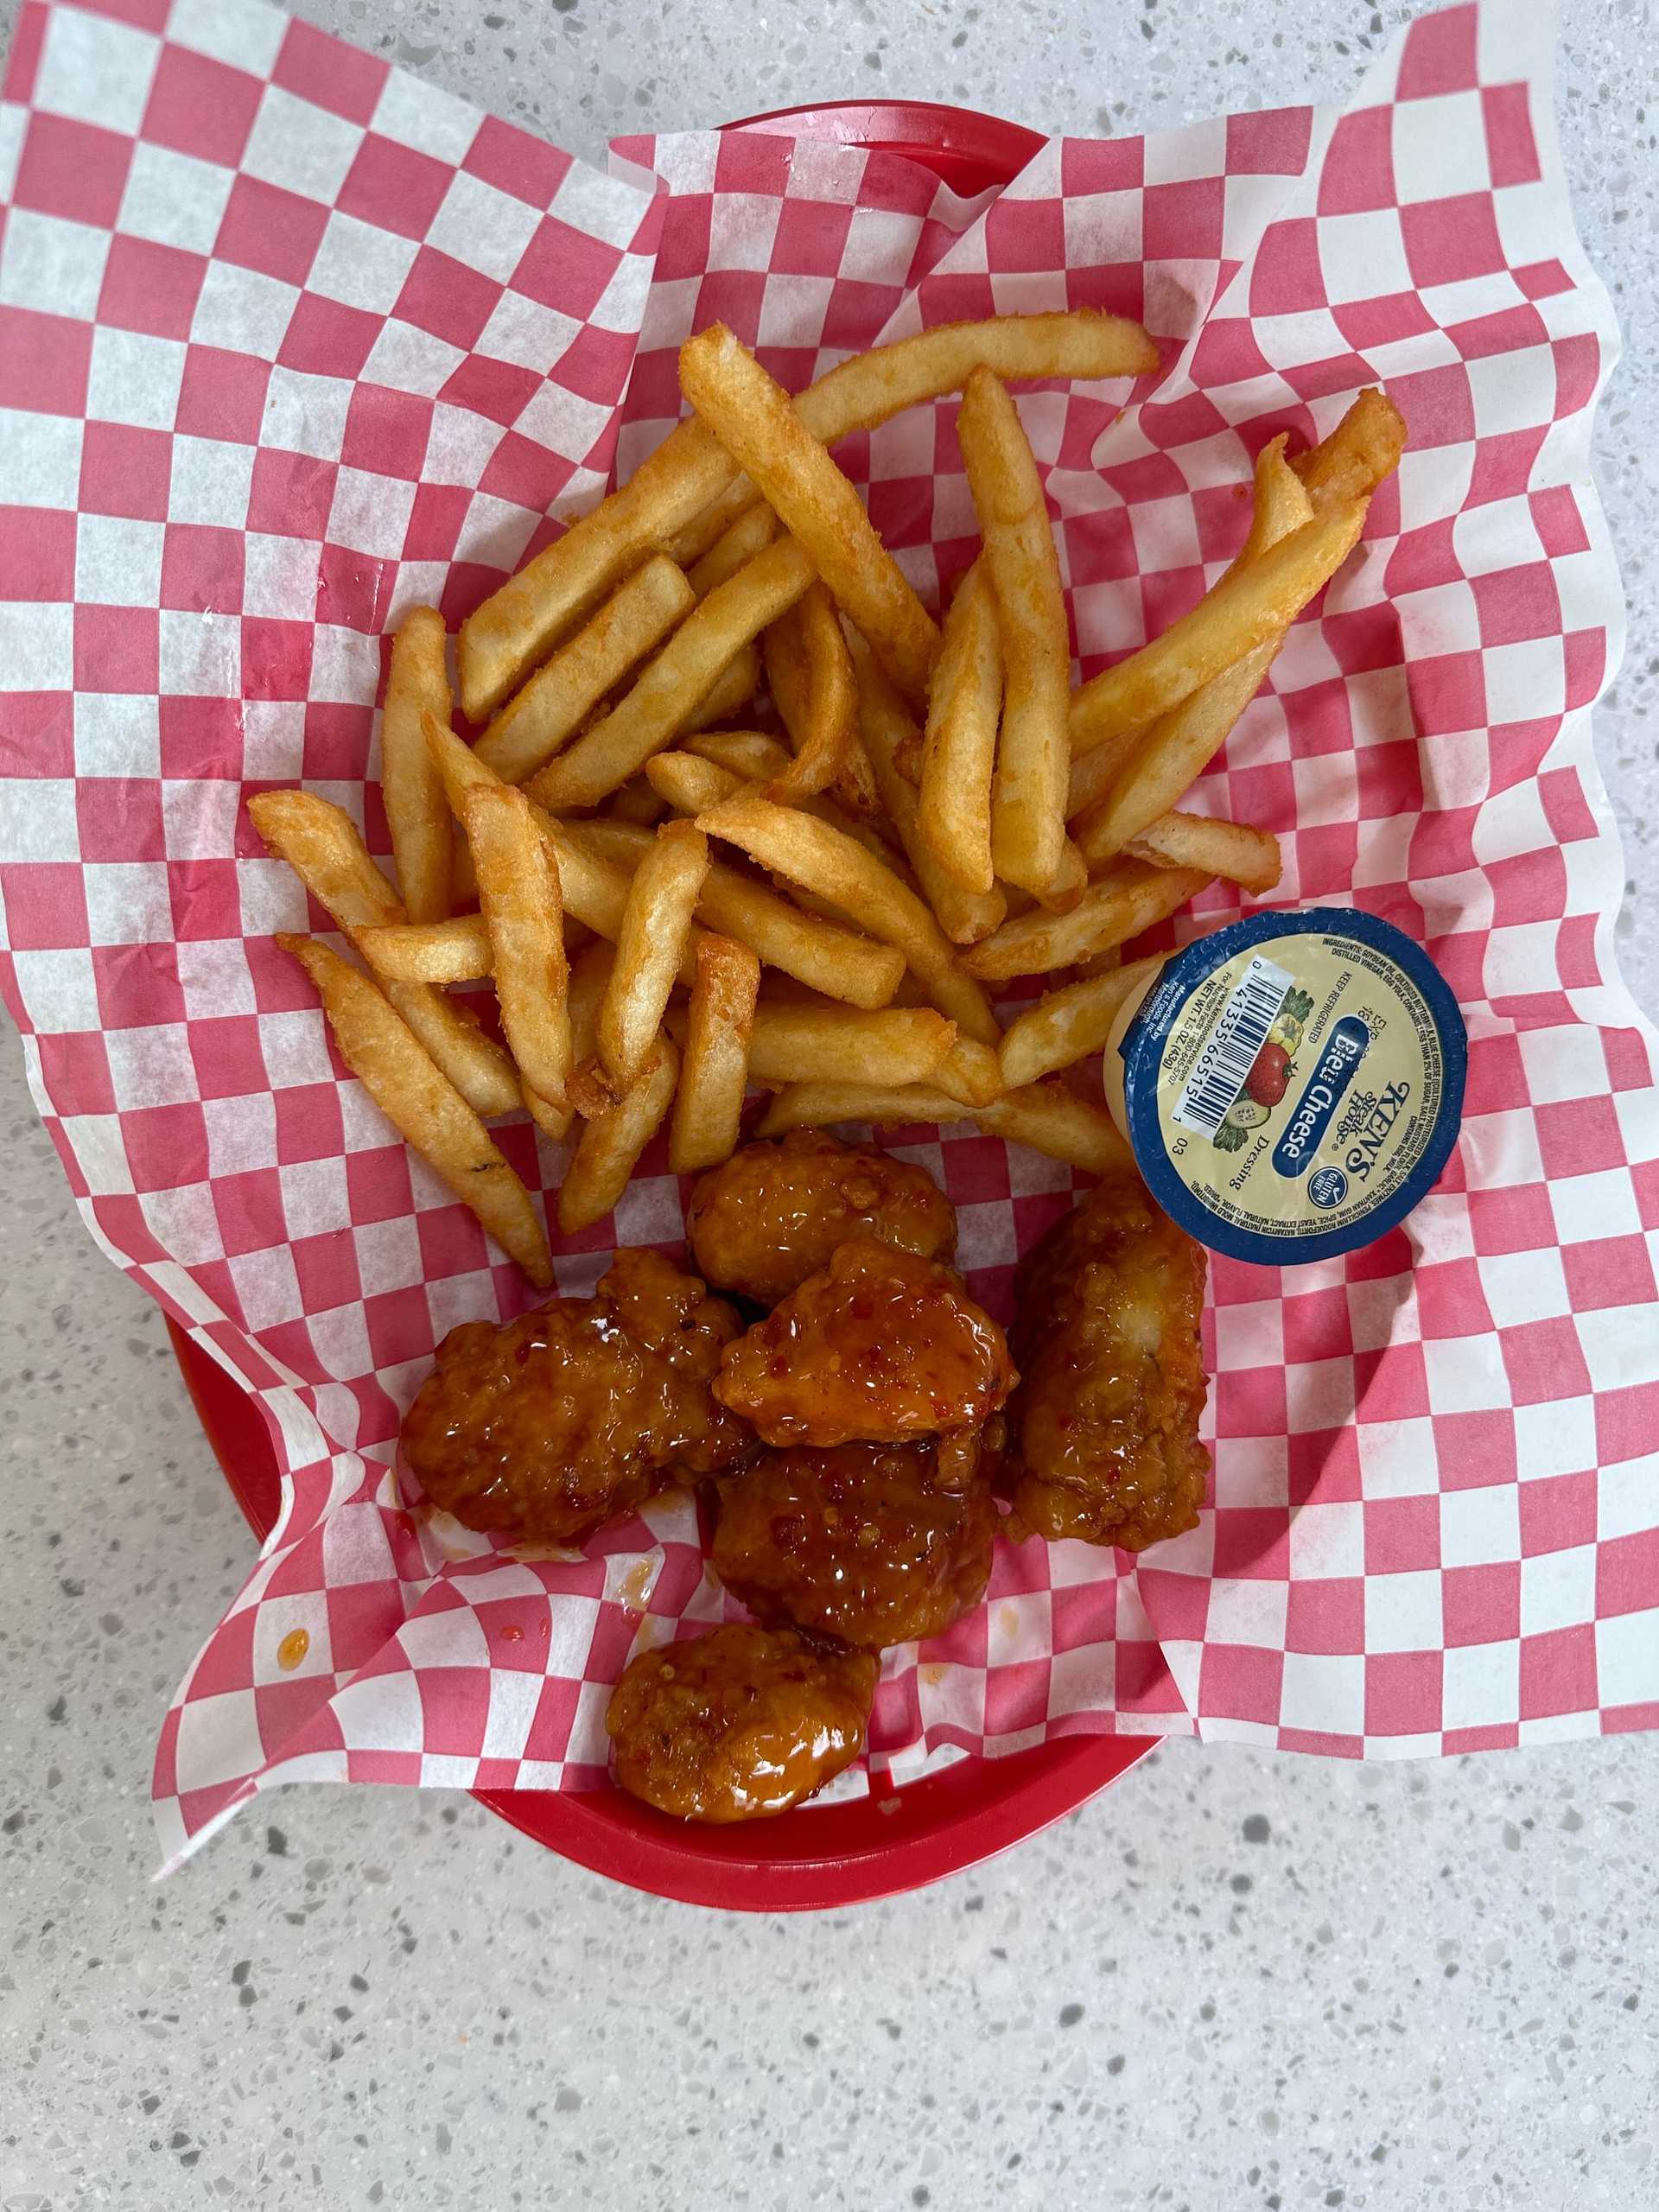 Basket of chicken nuggets with fries, red dipping sauce, on a checkered paper-lined tray.